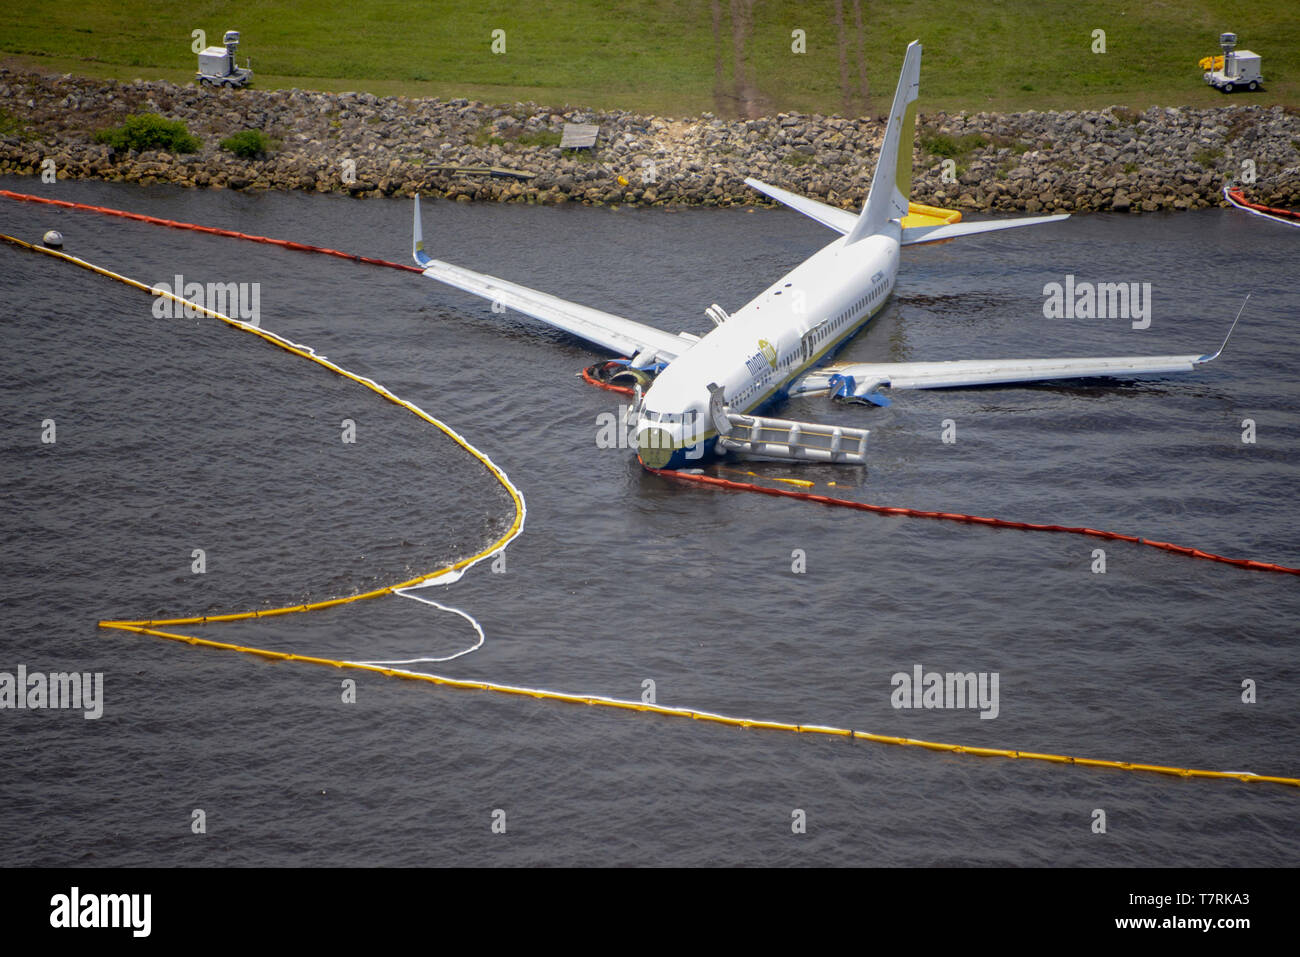 A Boeing 737 aircraft rests in shallow water in the St. Johns River at Naval Air Station Jacksonville May 4, 2019 in Jacksonville, Florida. The charter aircraft was transporting 143 military passengers  from Naval Station Guantanamo Bay, Cuba to Jacksonville when it slid off the runway on May 3rd. All passengers survived the crash. Stock Photo